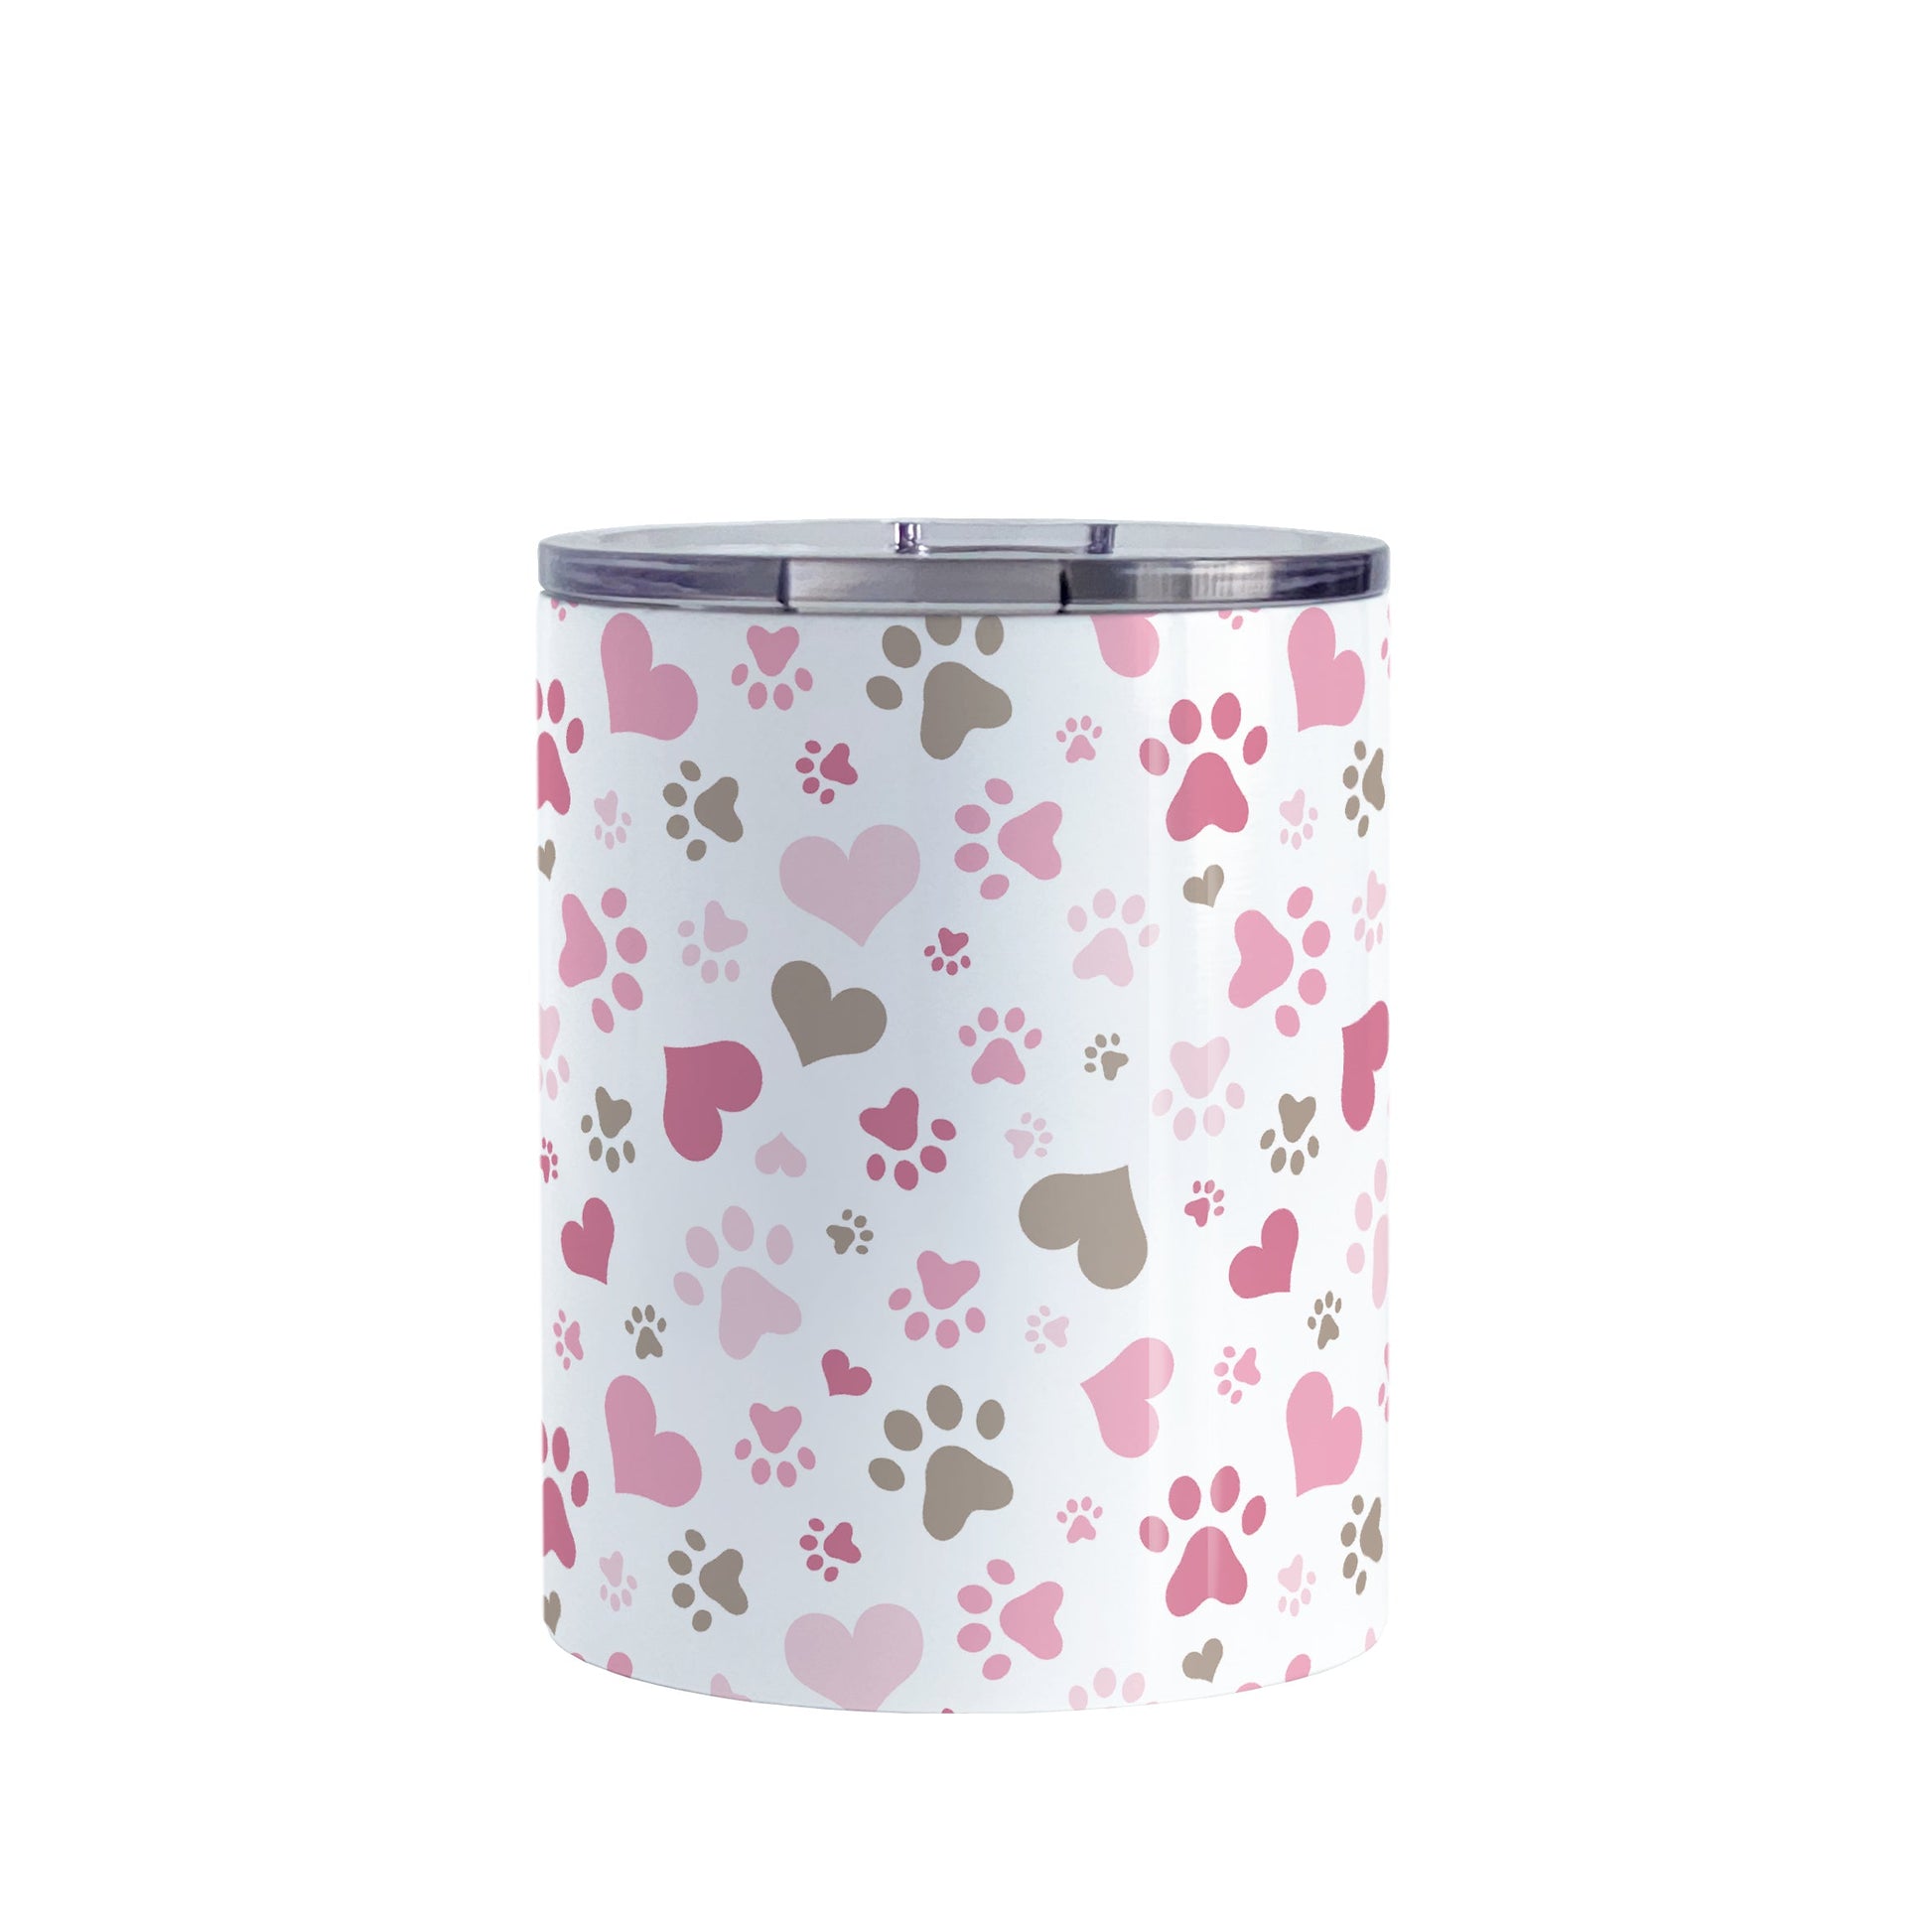 Pink Hearts and Paw Prints Tumbler Cup (10oz) at Amy's Coffee Mugs. A stainless steel insulated tumbler cup designed with a pattern of hearts and paw prints in brown and different shades of pink that wraps around the cup. This tumbler cup is perfect for people love dogs and cute paw print designs.